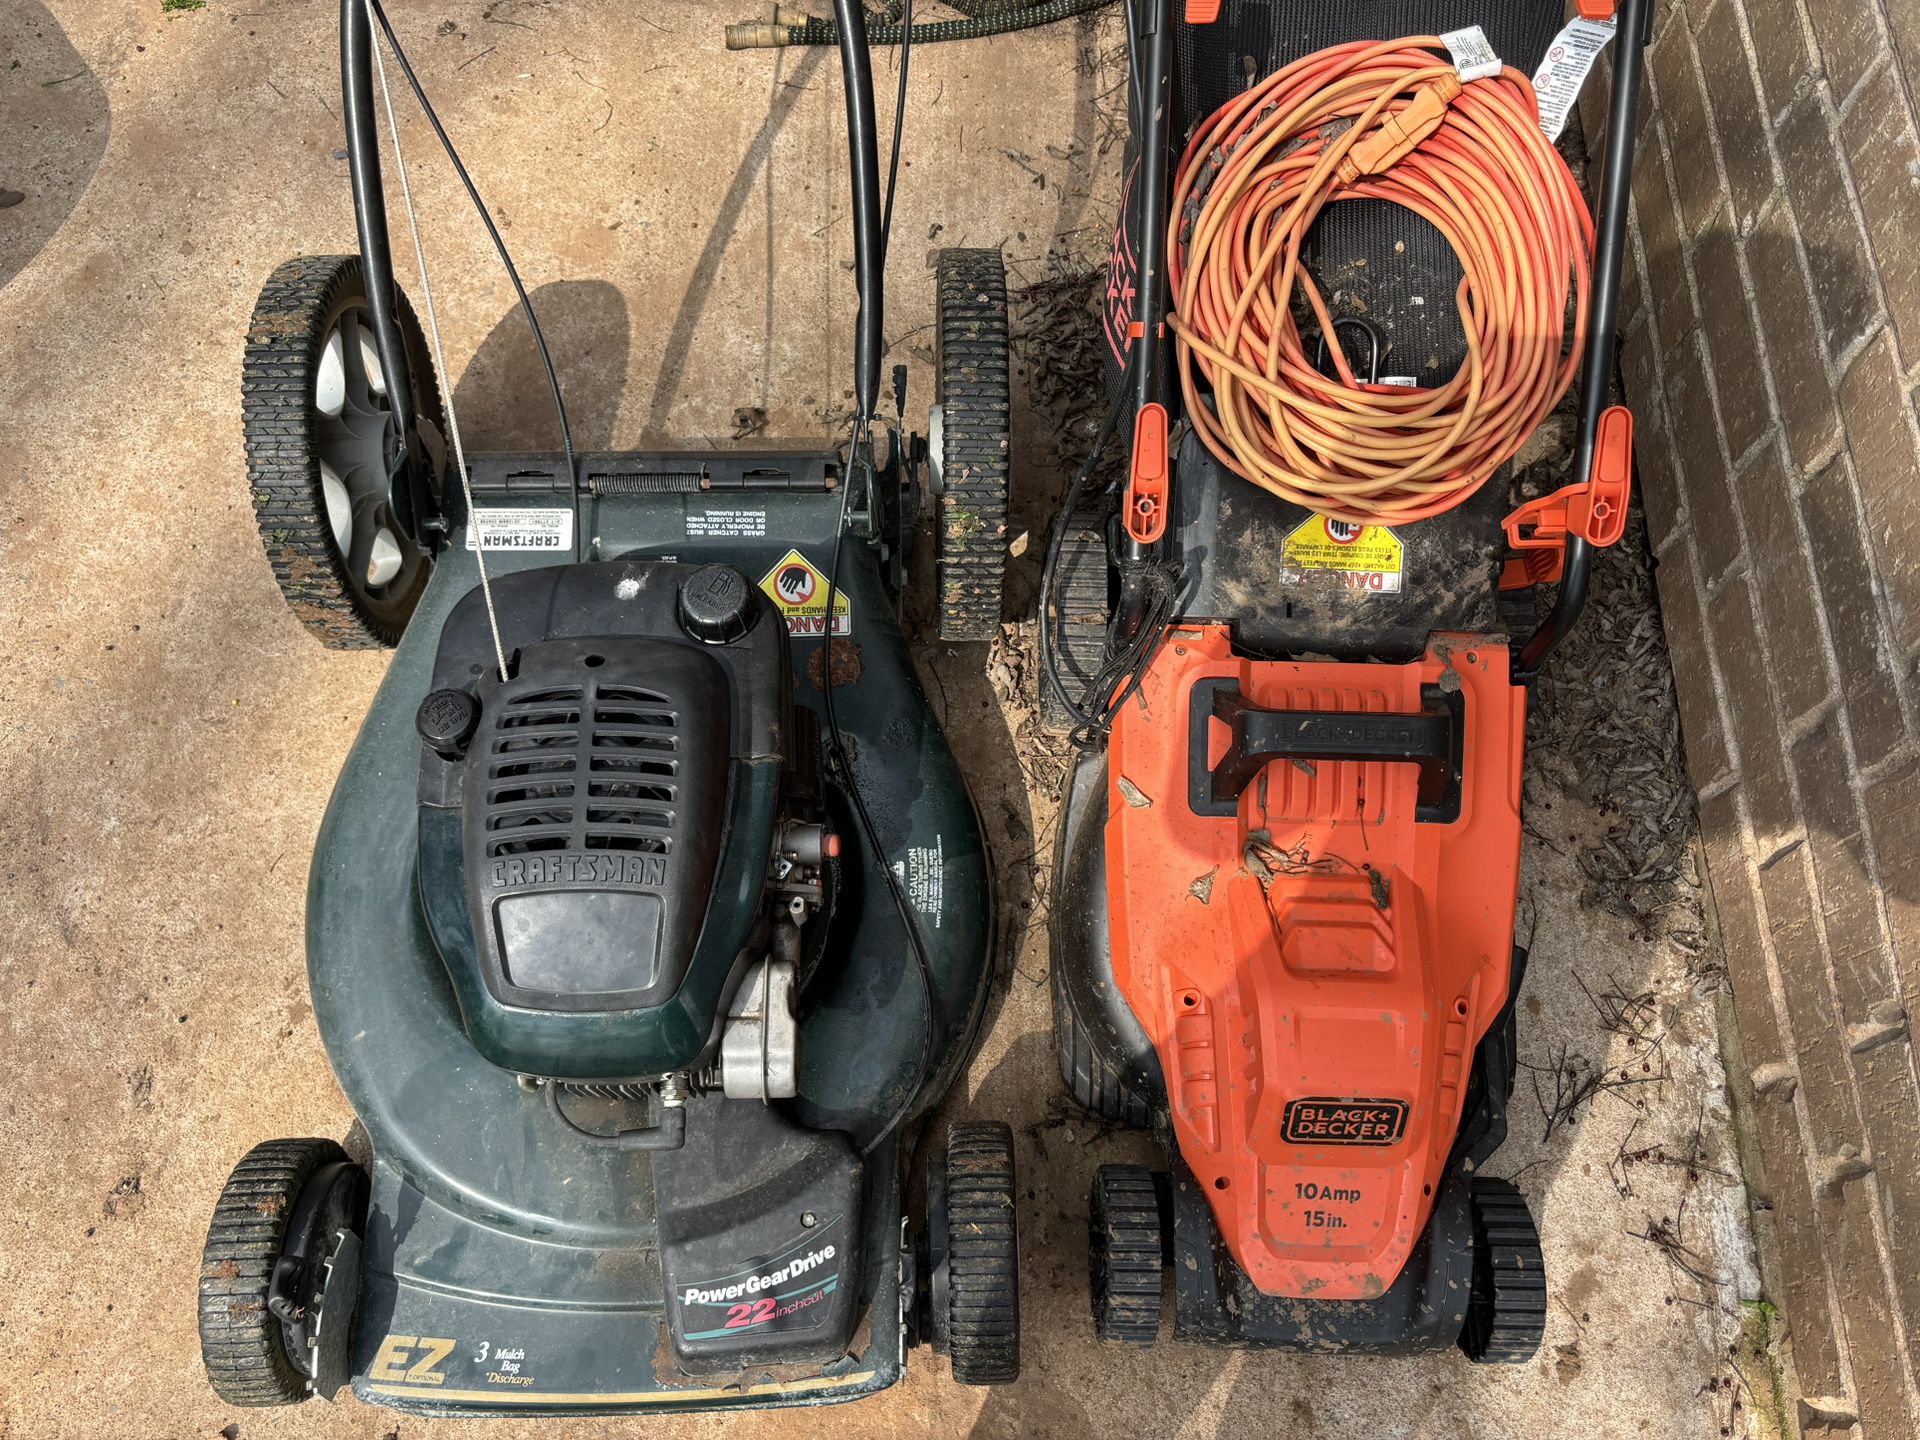 2 Lawnmowers For Sale